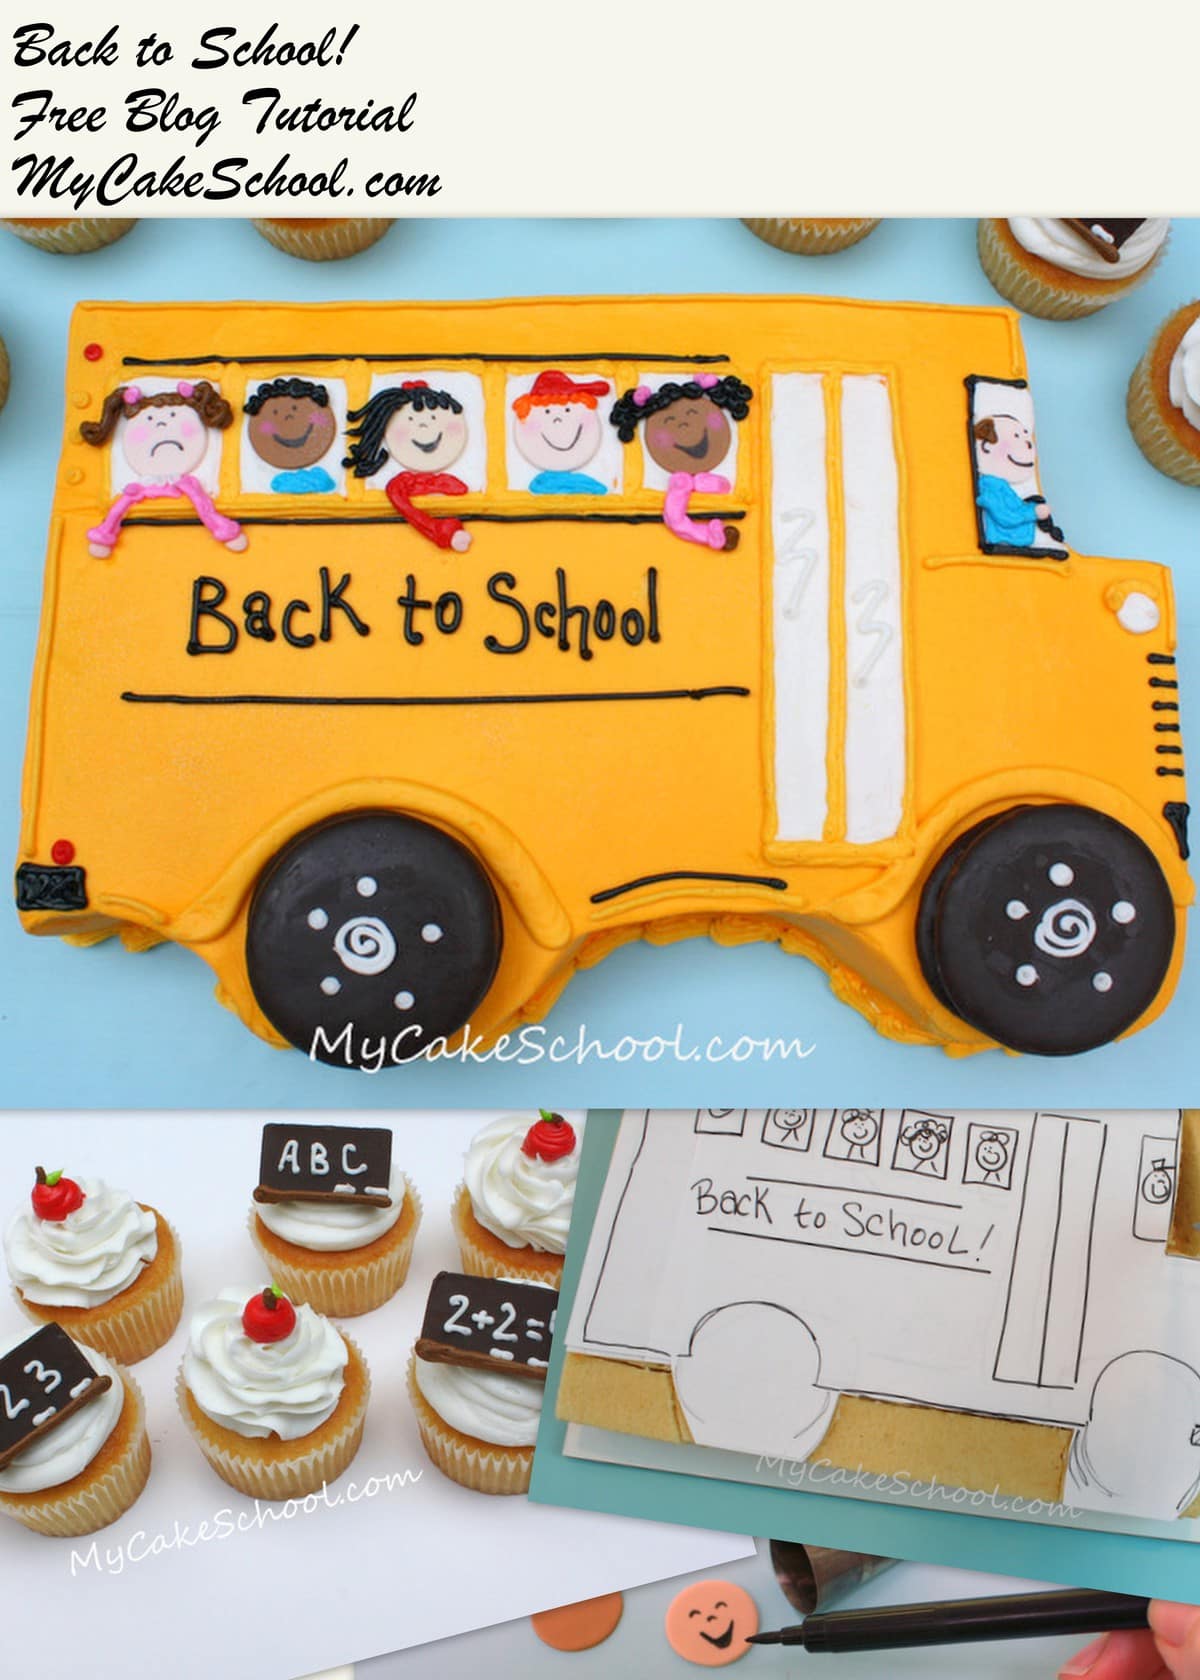 Mulukaya 30Pcs Back to School Themed Cupcake Toppers Blackboard Pencil Ruler School Bus Cake Picks for Kindergarten First Day School Welcome Party